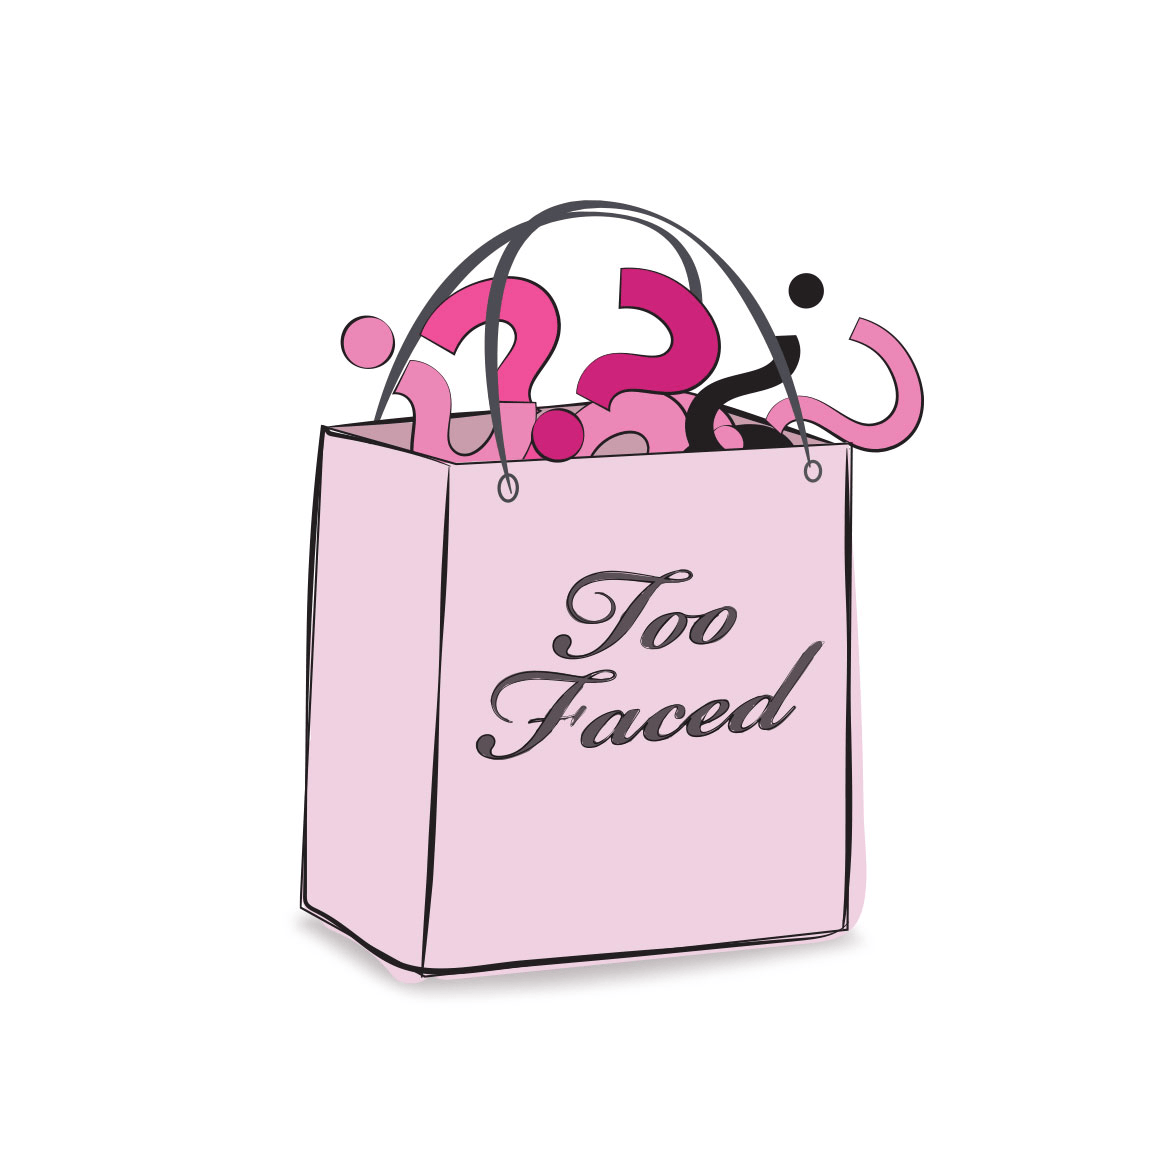 Too Faced Logo - Too Faced Cyber Monday 2016 Mystery Bag Full Spoilers! - hello ...